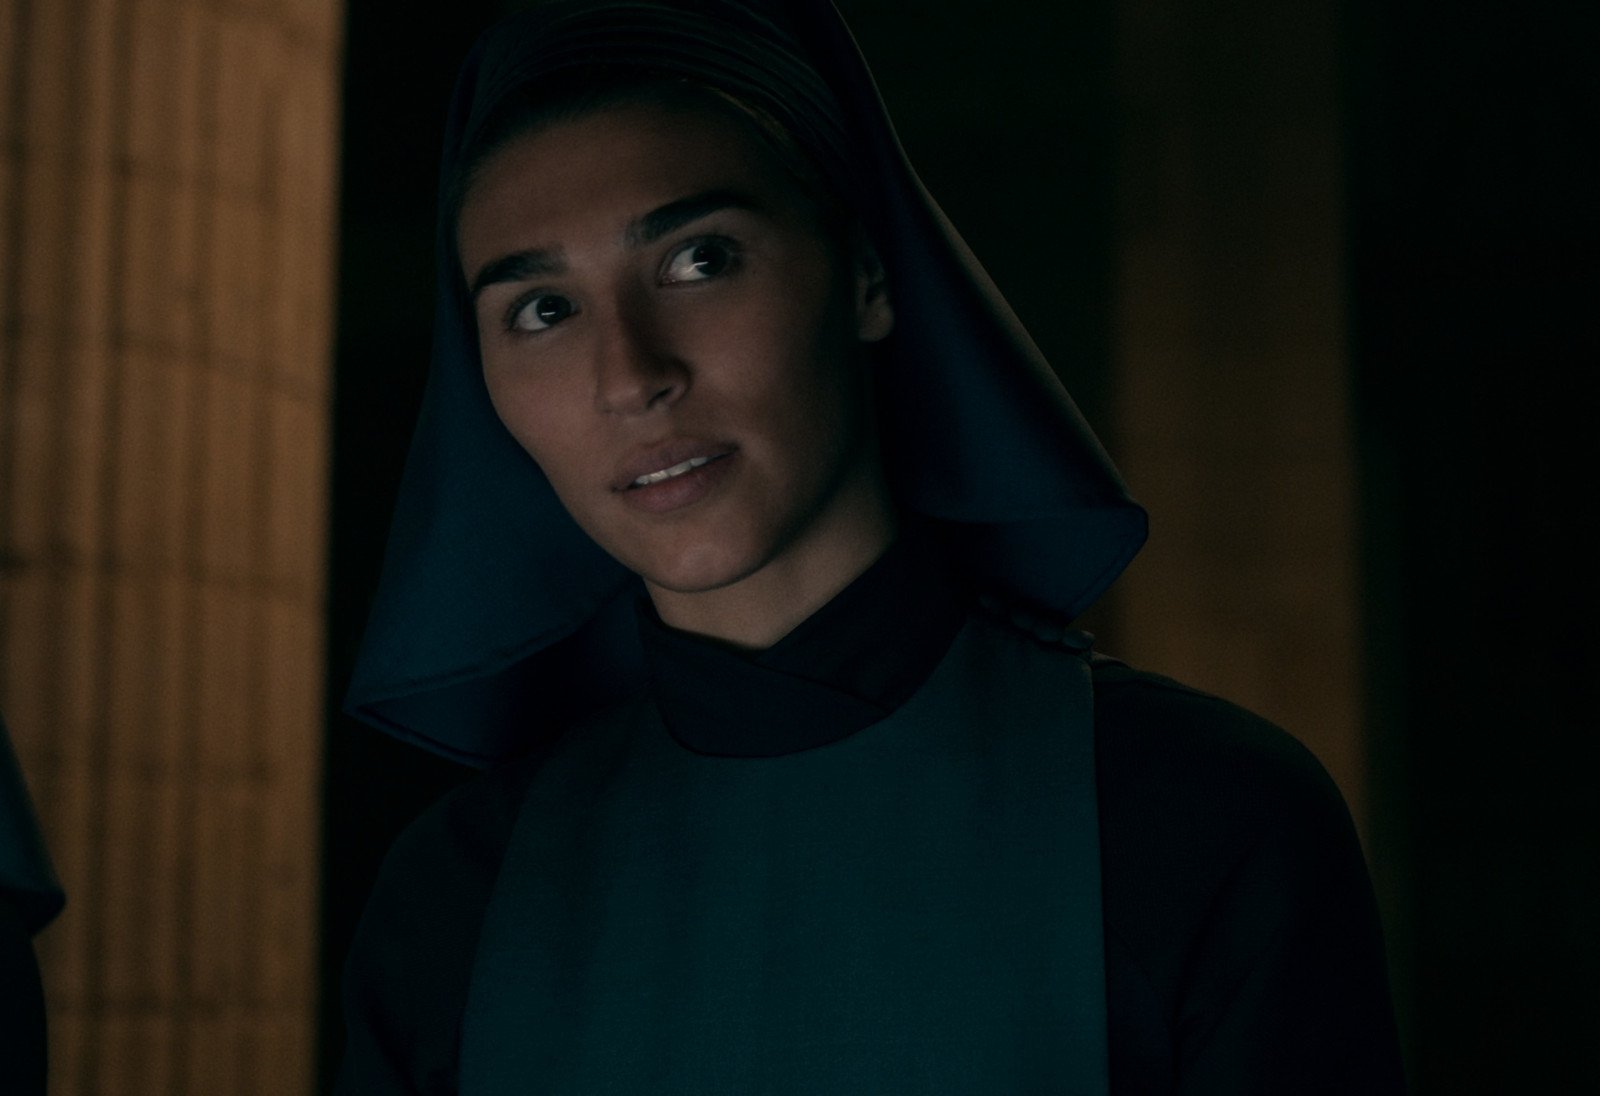 Lorena Andrea as Lilith in 'Warrior Nun' for our recap of season 1. She's wearing a dark dress and habit.